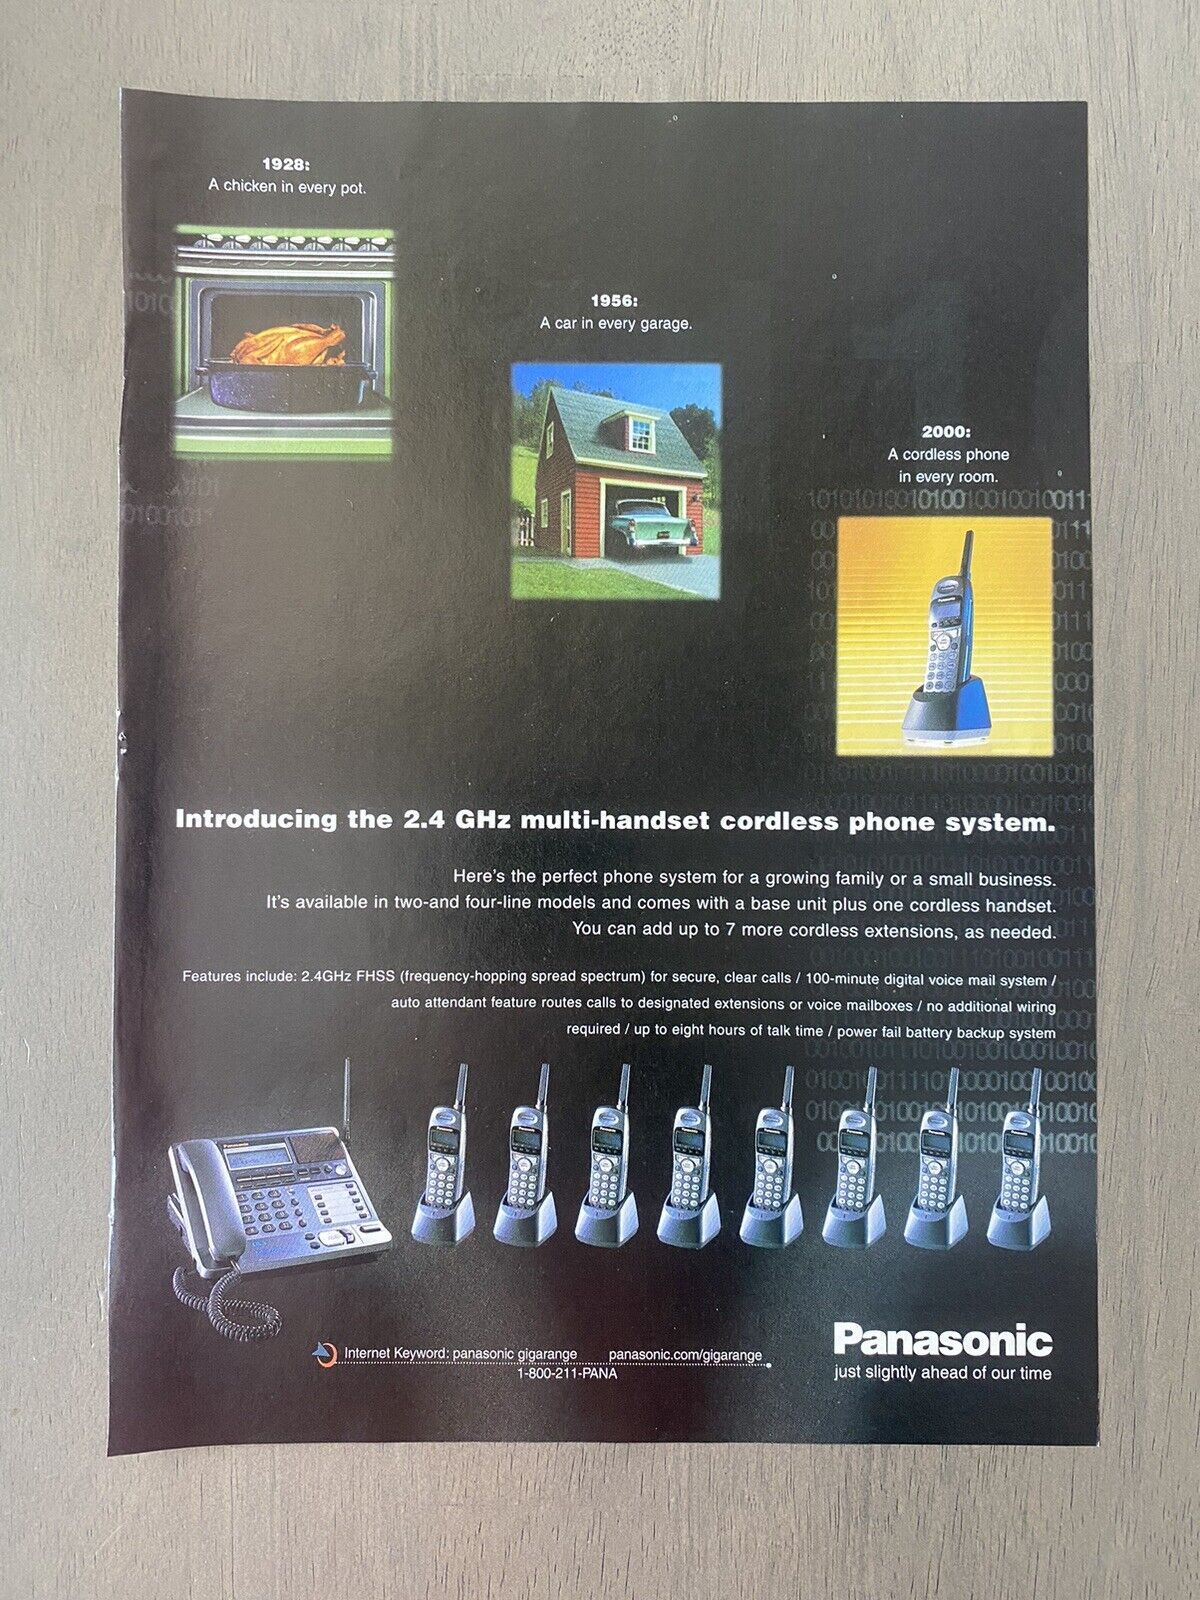 Vintage Y2K 2000 Panasonic Cordless Phone Slightly Ahead of Our Time 11” x 8” Ad